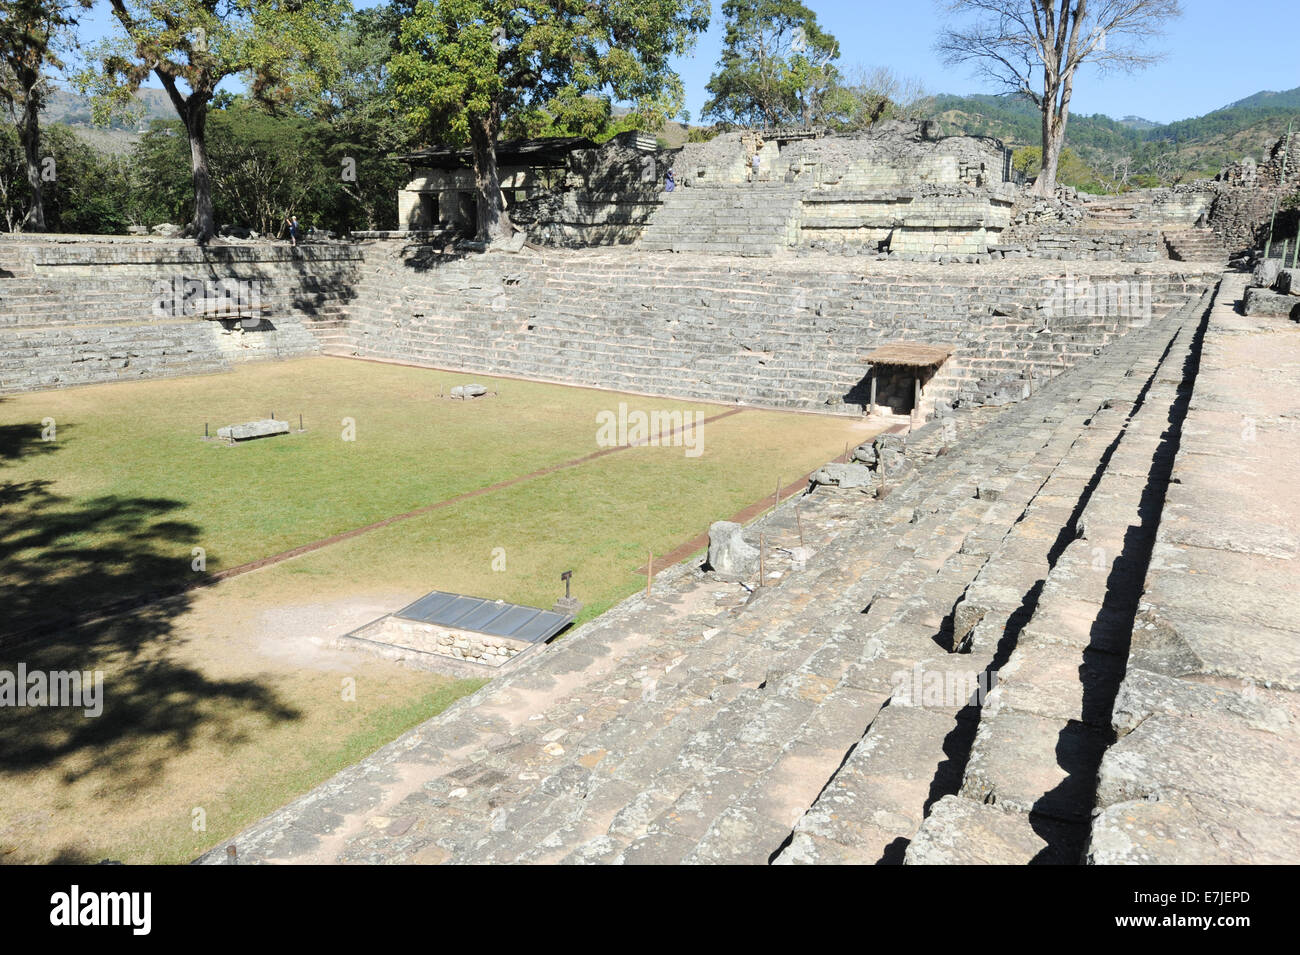 Central America, Americas, ancient, archaeology, architecture, building, built, carved, copan, culture, patio, exterior, gods, g Stock Photo